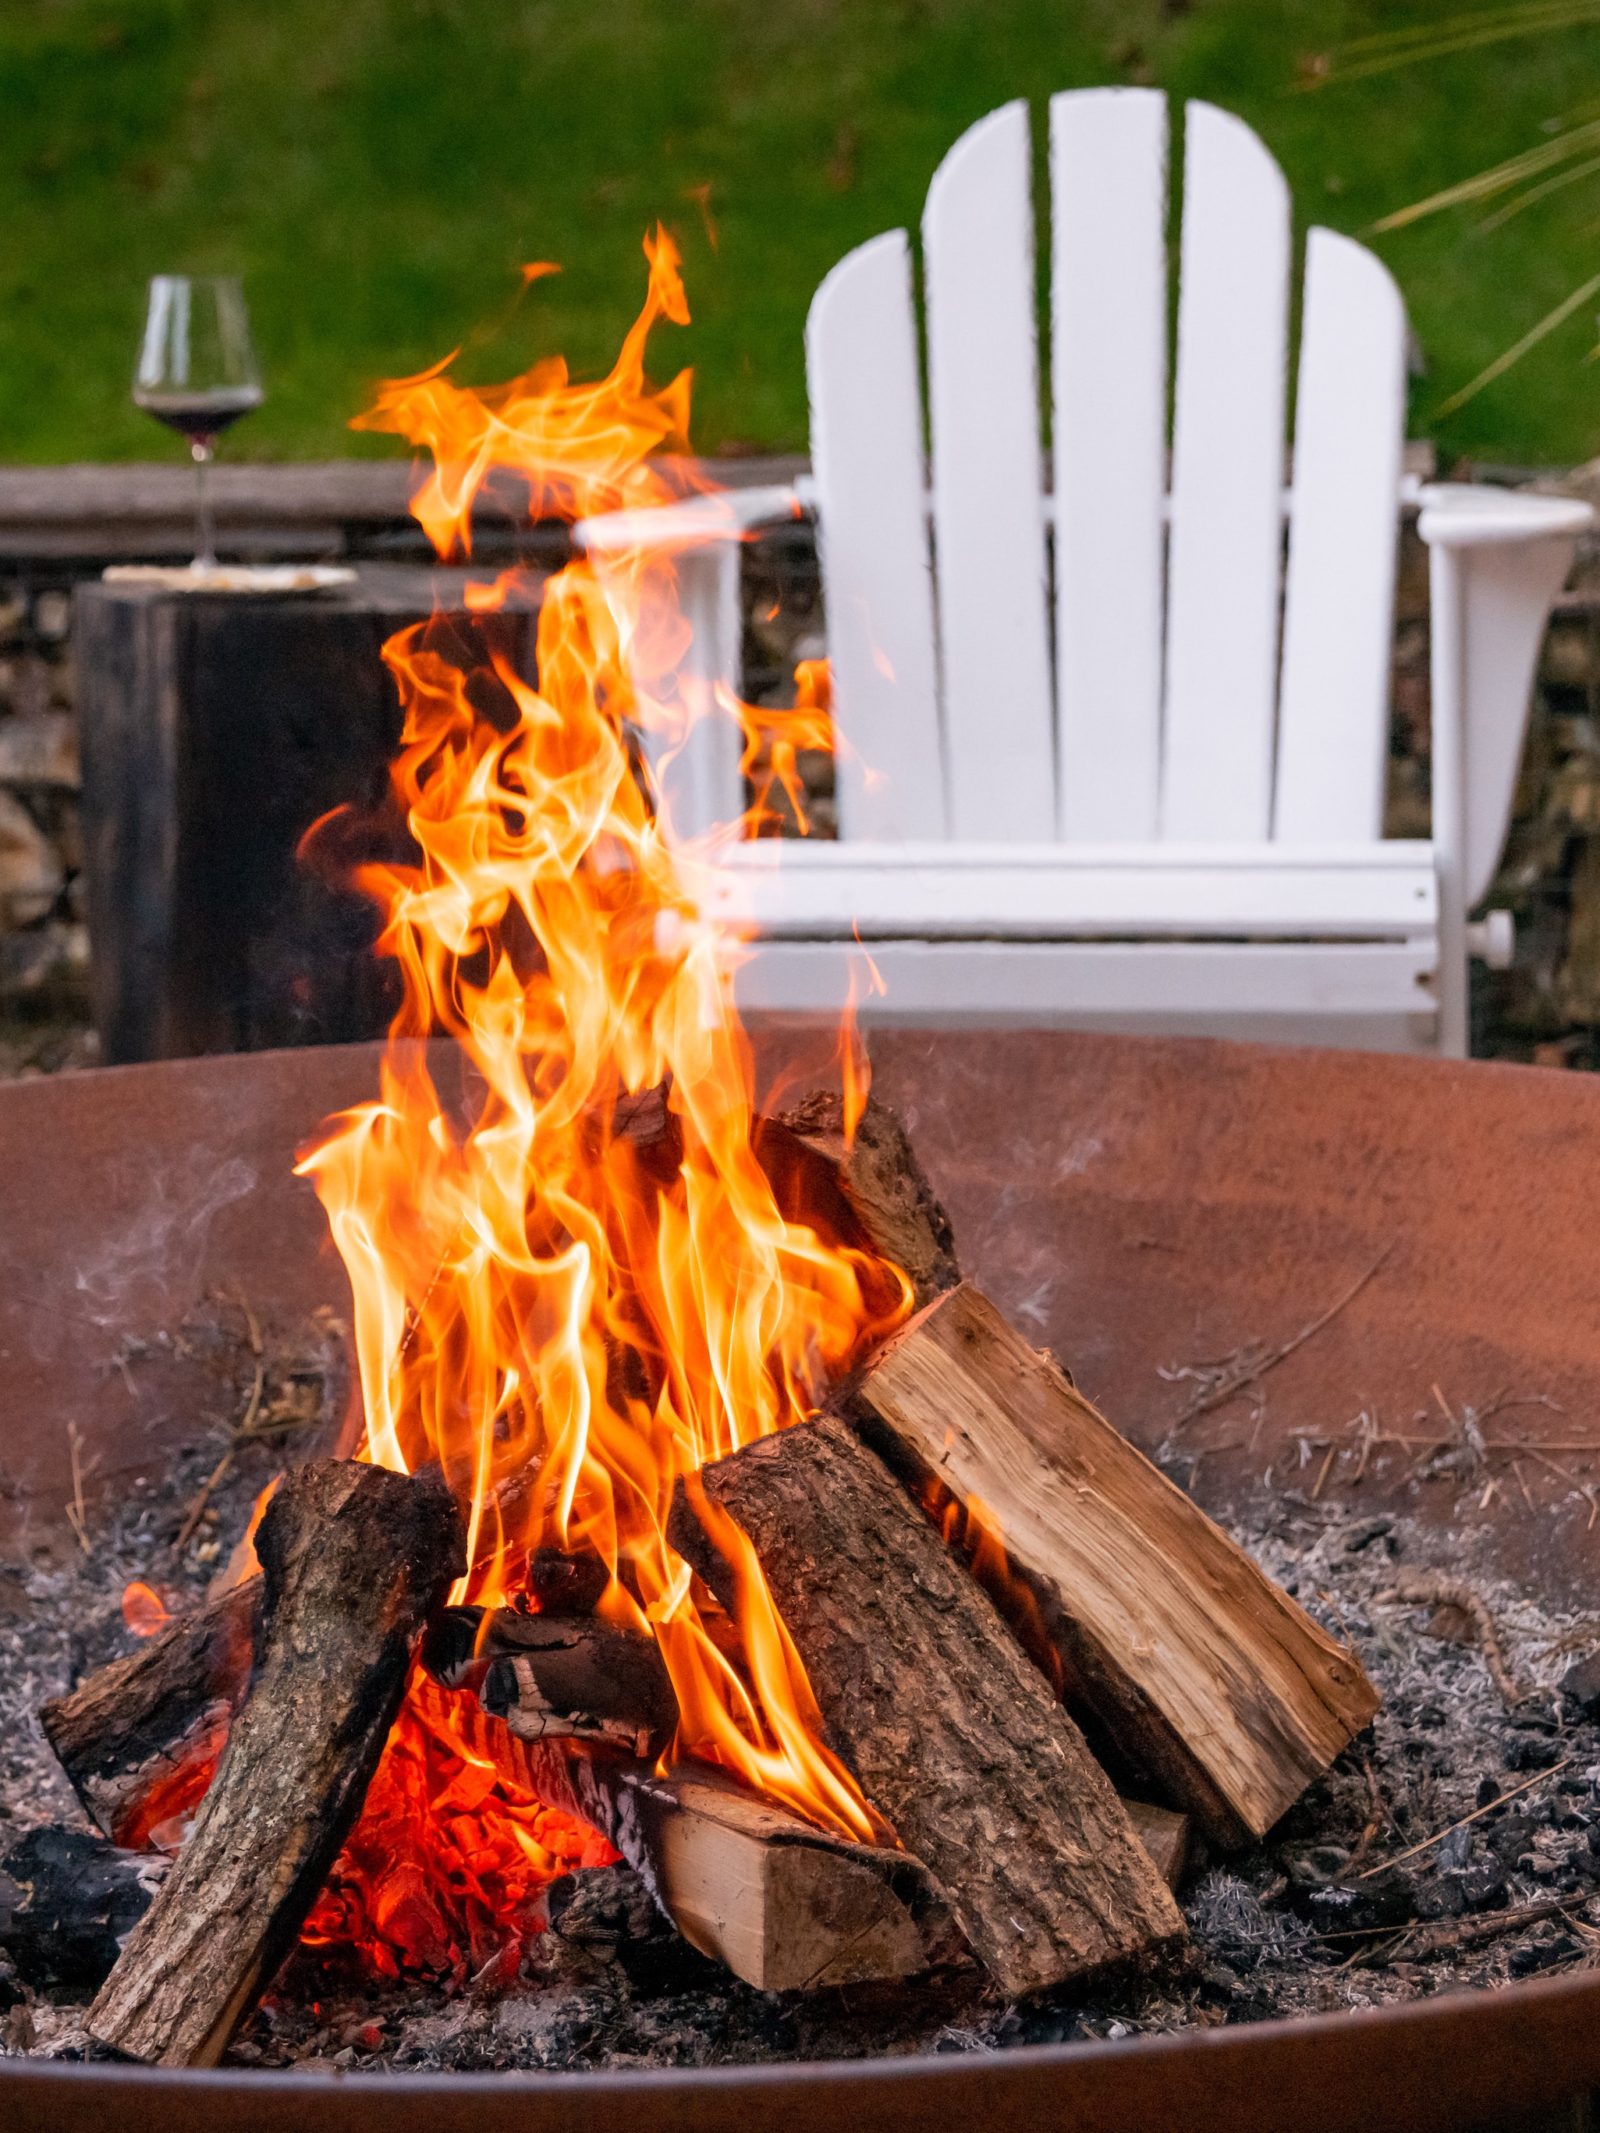 How To Safely Use A Fire Pit On Your, Highland Wood Burning Fire Pit